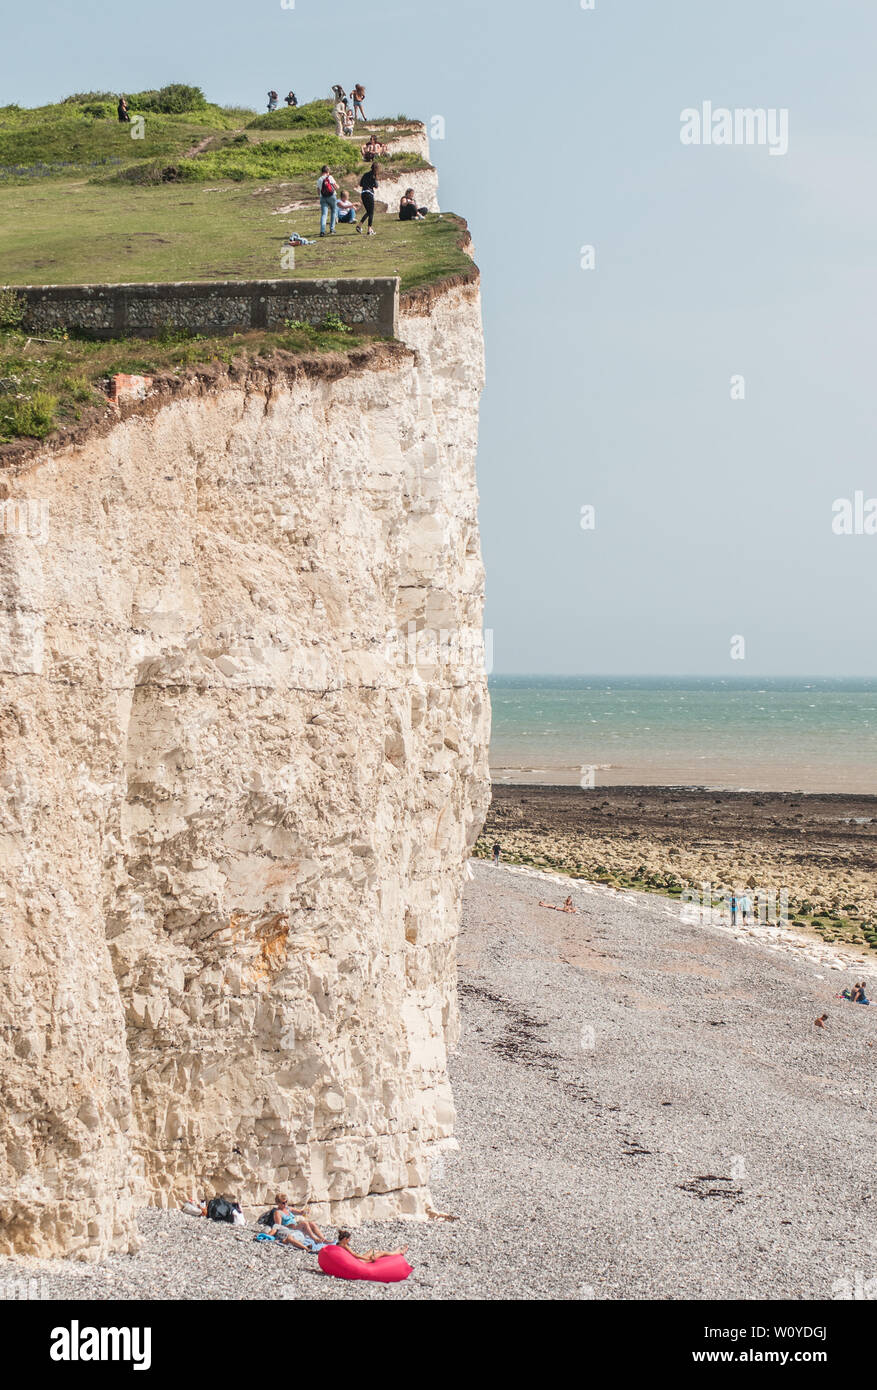 Birling Gap, Eastbourne, East Sussex. 28 June 2019. UK Weather:Glorious summer weather is bringing tourists flocking to the South Coast beauty spot. Some seem unaware of the fragility & undercutting along the chalk cliffs. Rock falls occuring frequently. It is not safe on the edge. Please keep safe. . Stock Photo